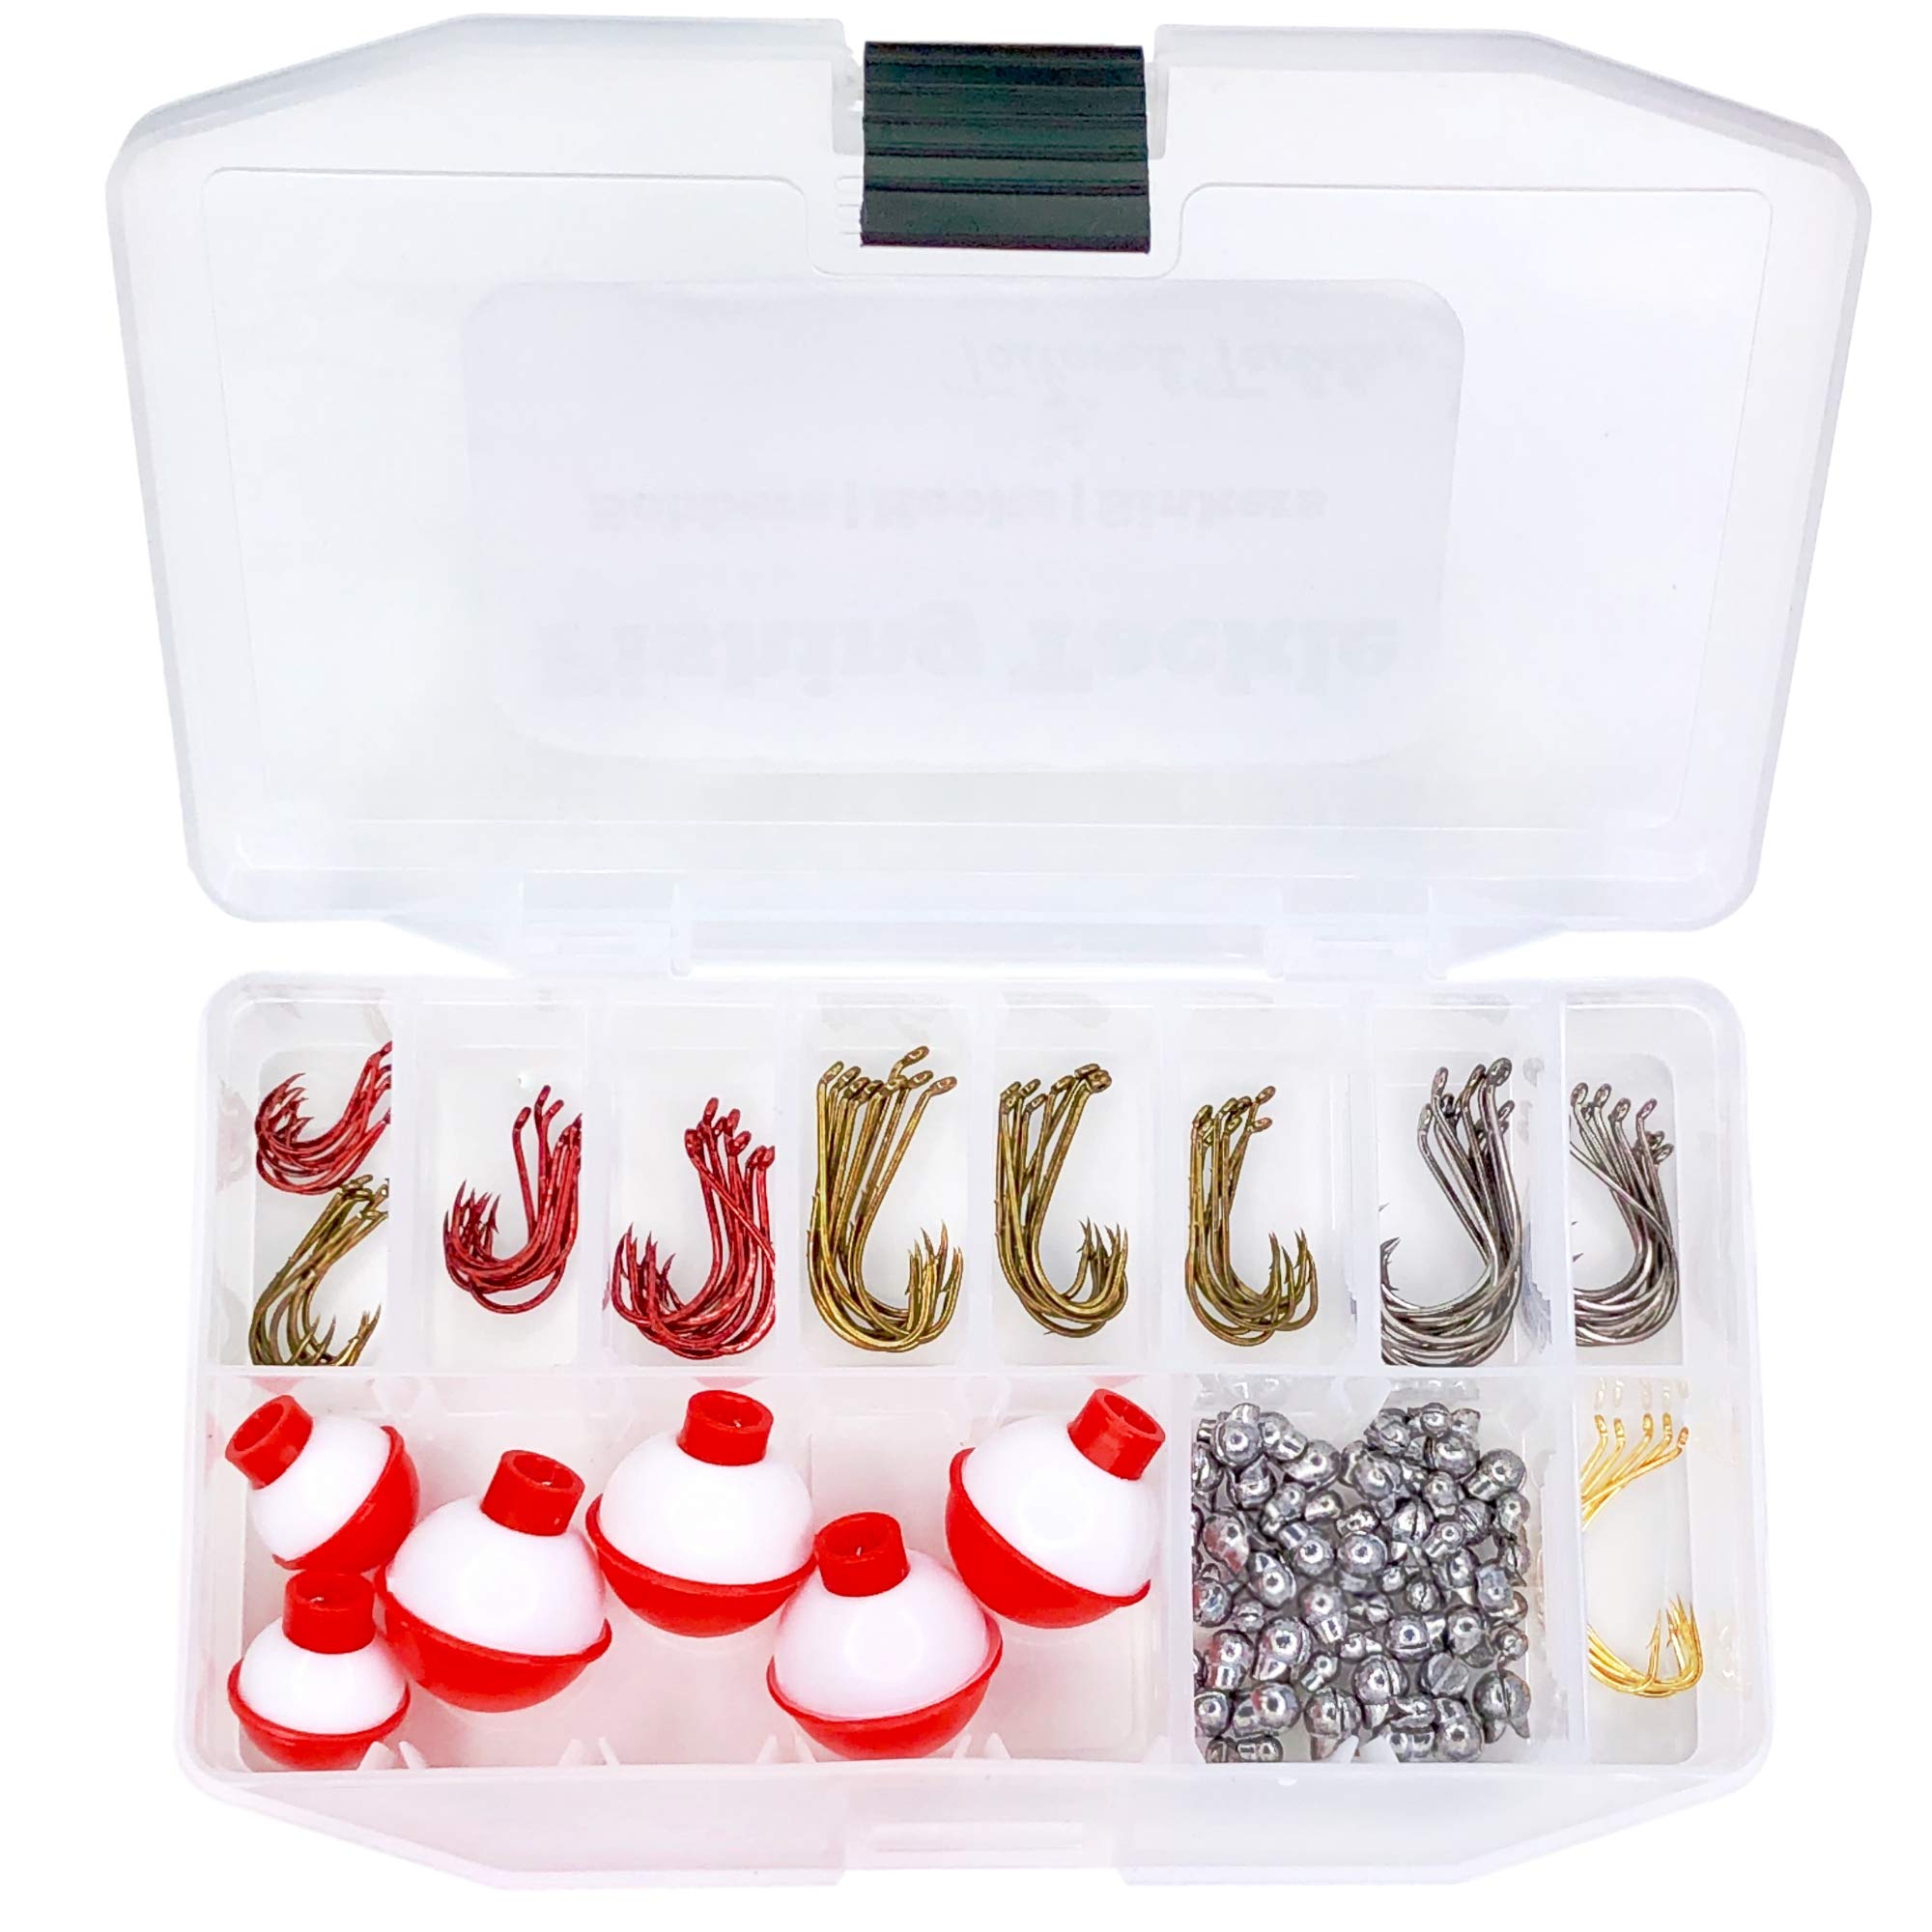 Tailored Tackle Bass Fishing Kit 77 Pc Bass Gear Tackle Box with